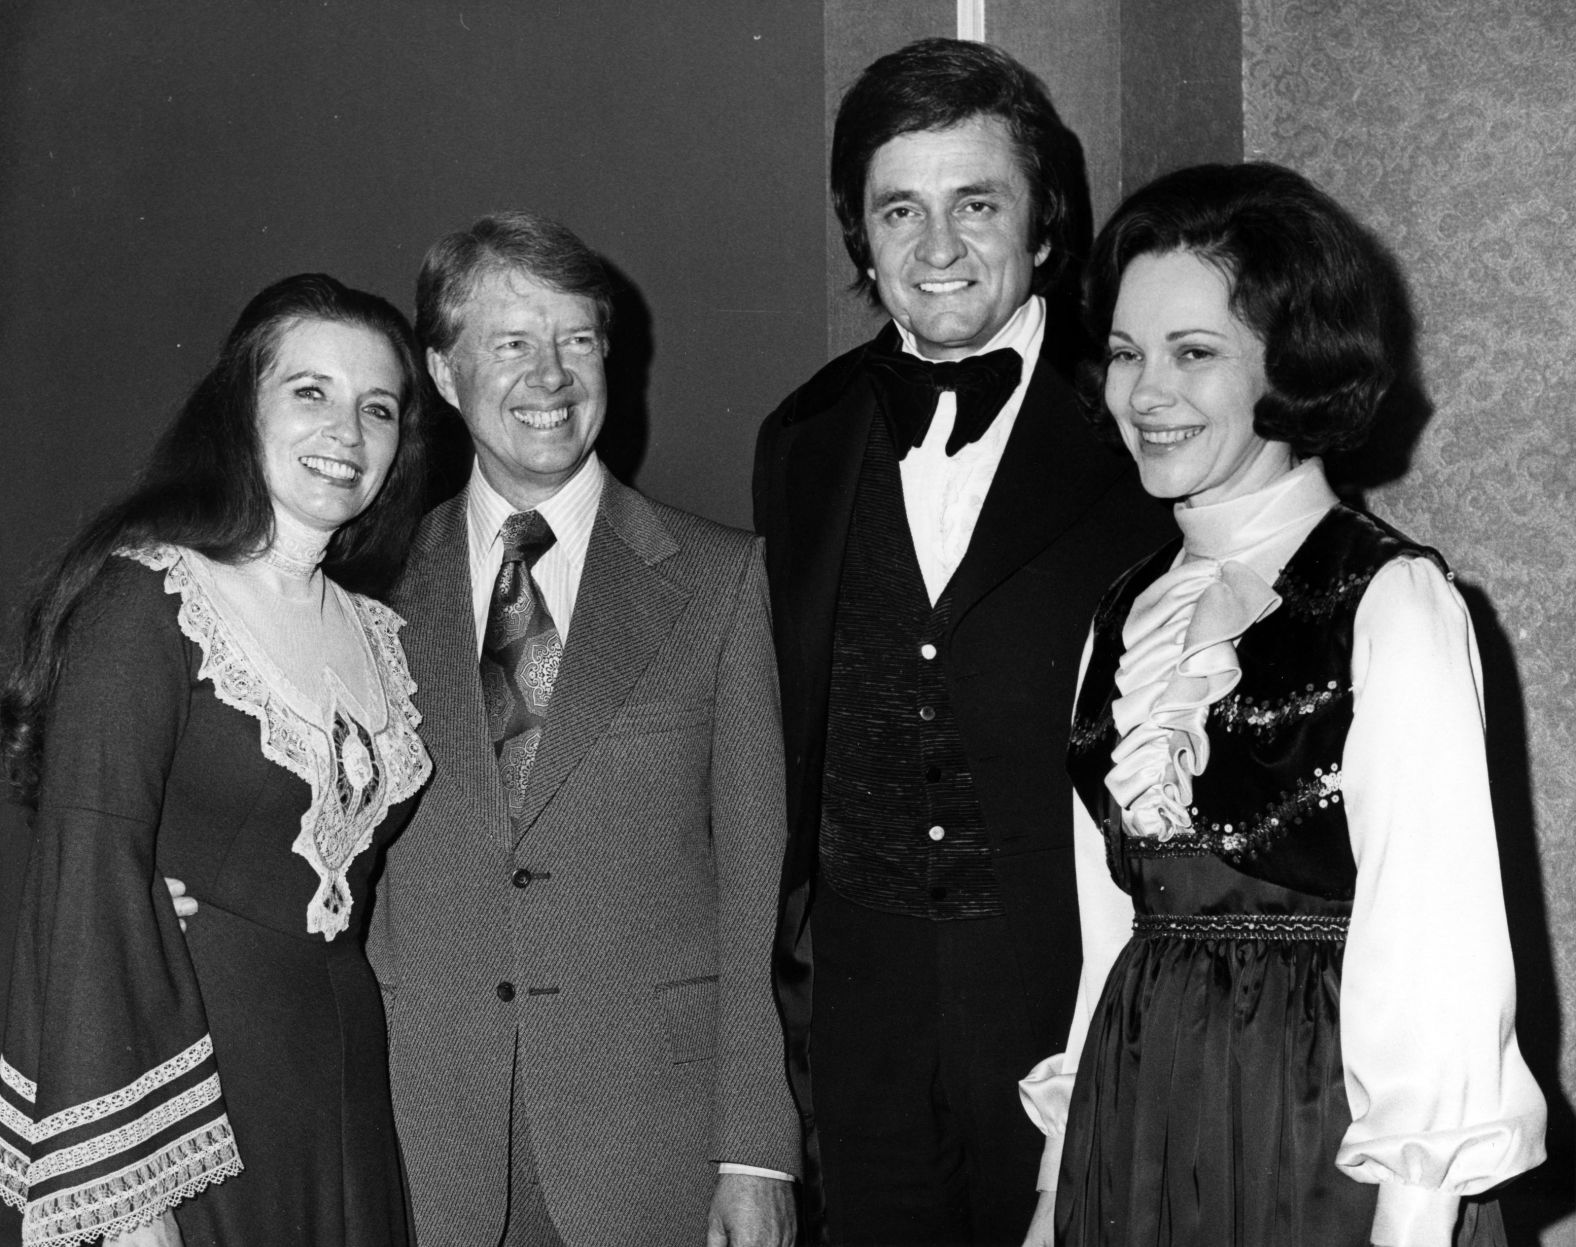 Johnny Cash was another artist with whom Carter was both a fan and a friend -- and maybe even family, as <a href="index.php?page=&url=https%3A%2F%2Fwww.presidency.ucsb.edu%2Fdocuments%2Fconference-hire-remarks-participants-the-conference" target="_blank" target="_blank">the long-running joke goes</a>. "I was glad when he brought June Cash (left) down here to meet me," Carter says in the film. "We always claimed that she was my cousin."